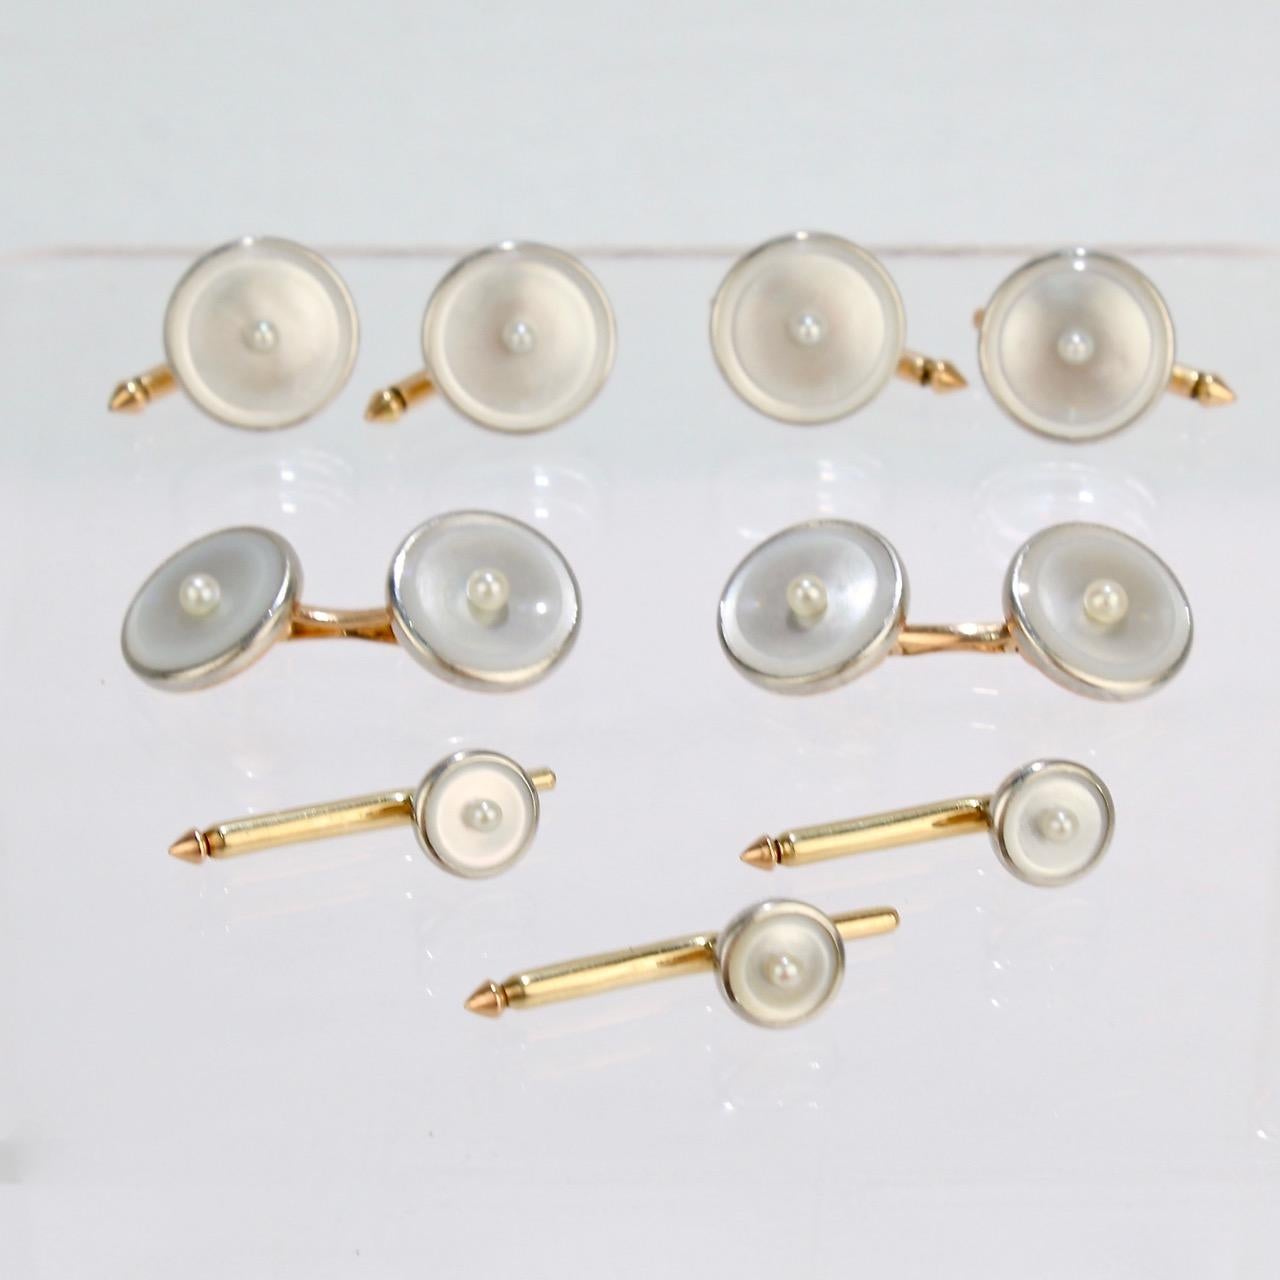 Men's Art Deco 14 Karat Gold, Mother of Pearl and Seed Pearl Cufflink and Dress Set